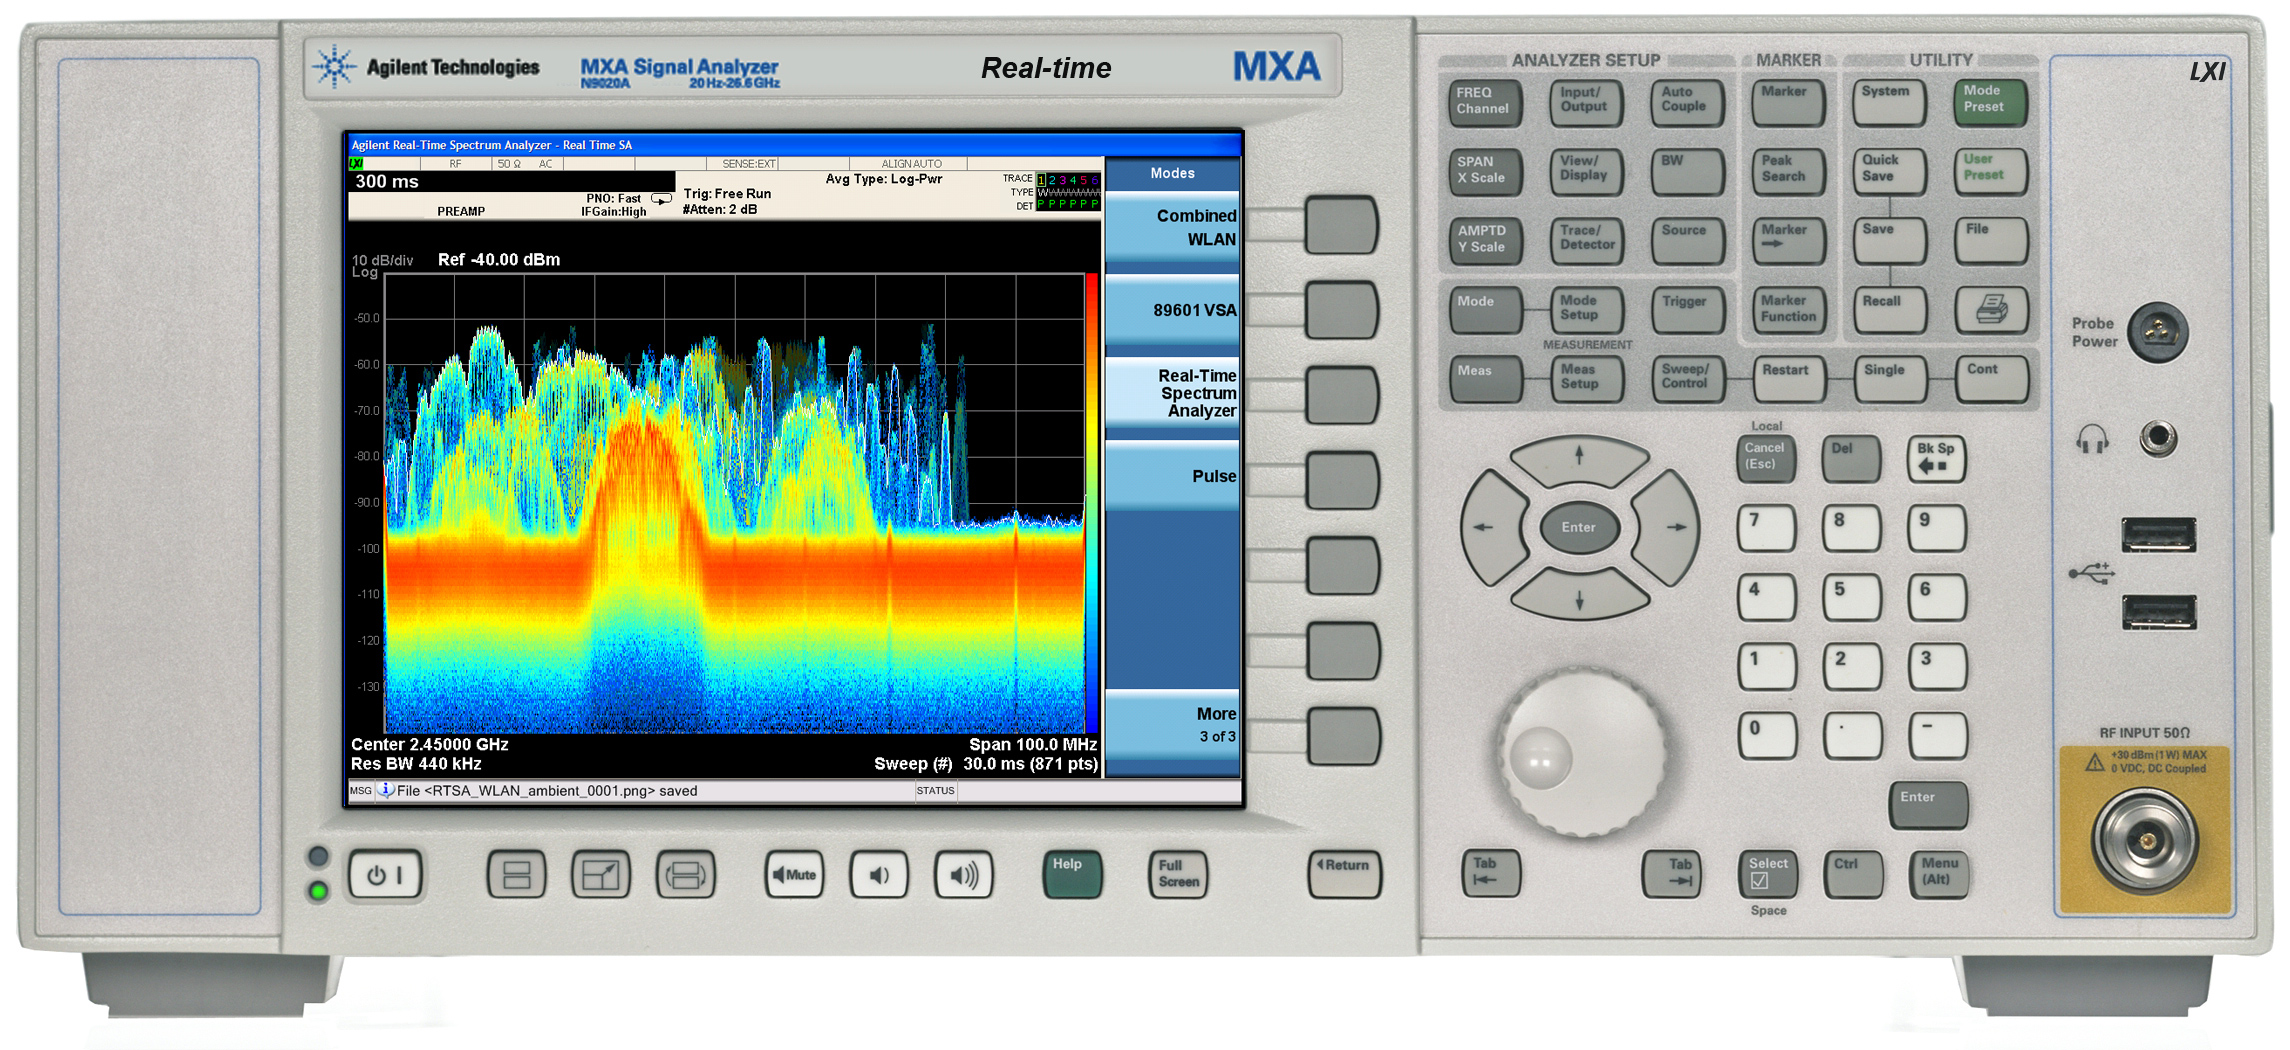 Figure 1: Agilent X-series analysers get new options for real-time capture and wider analysis bandwidths